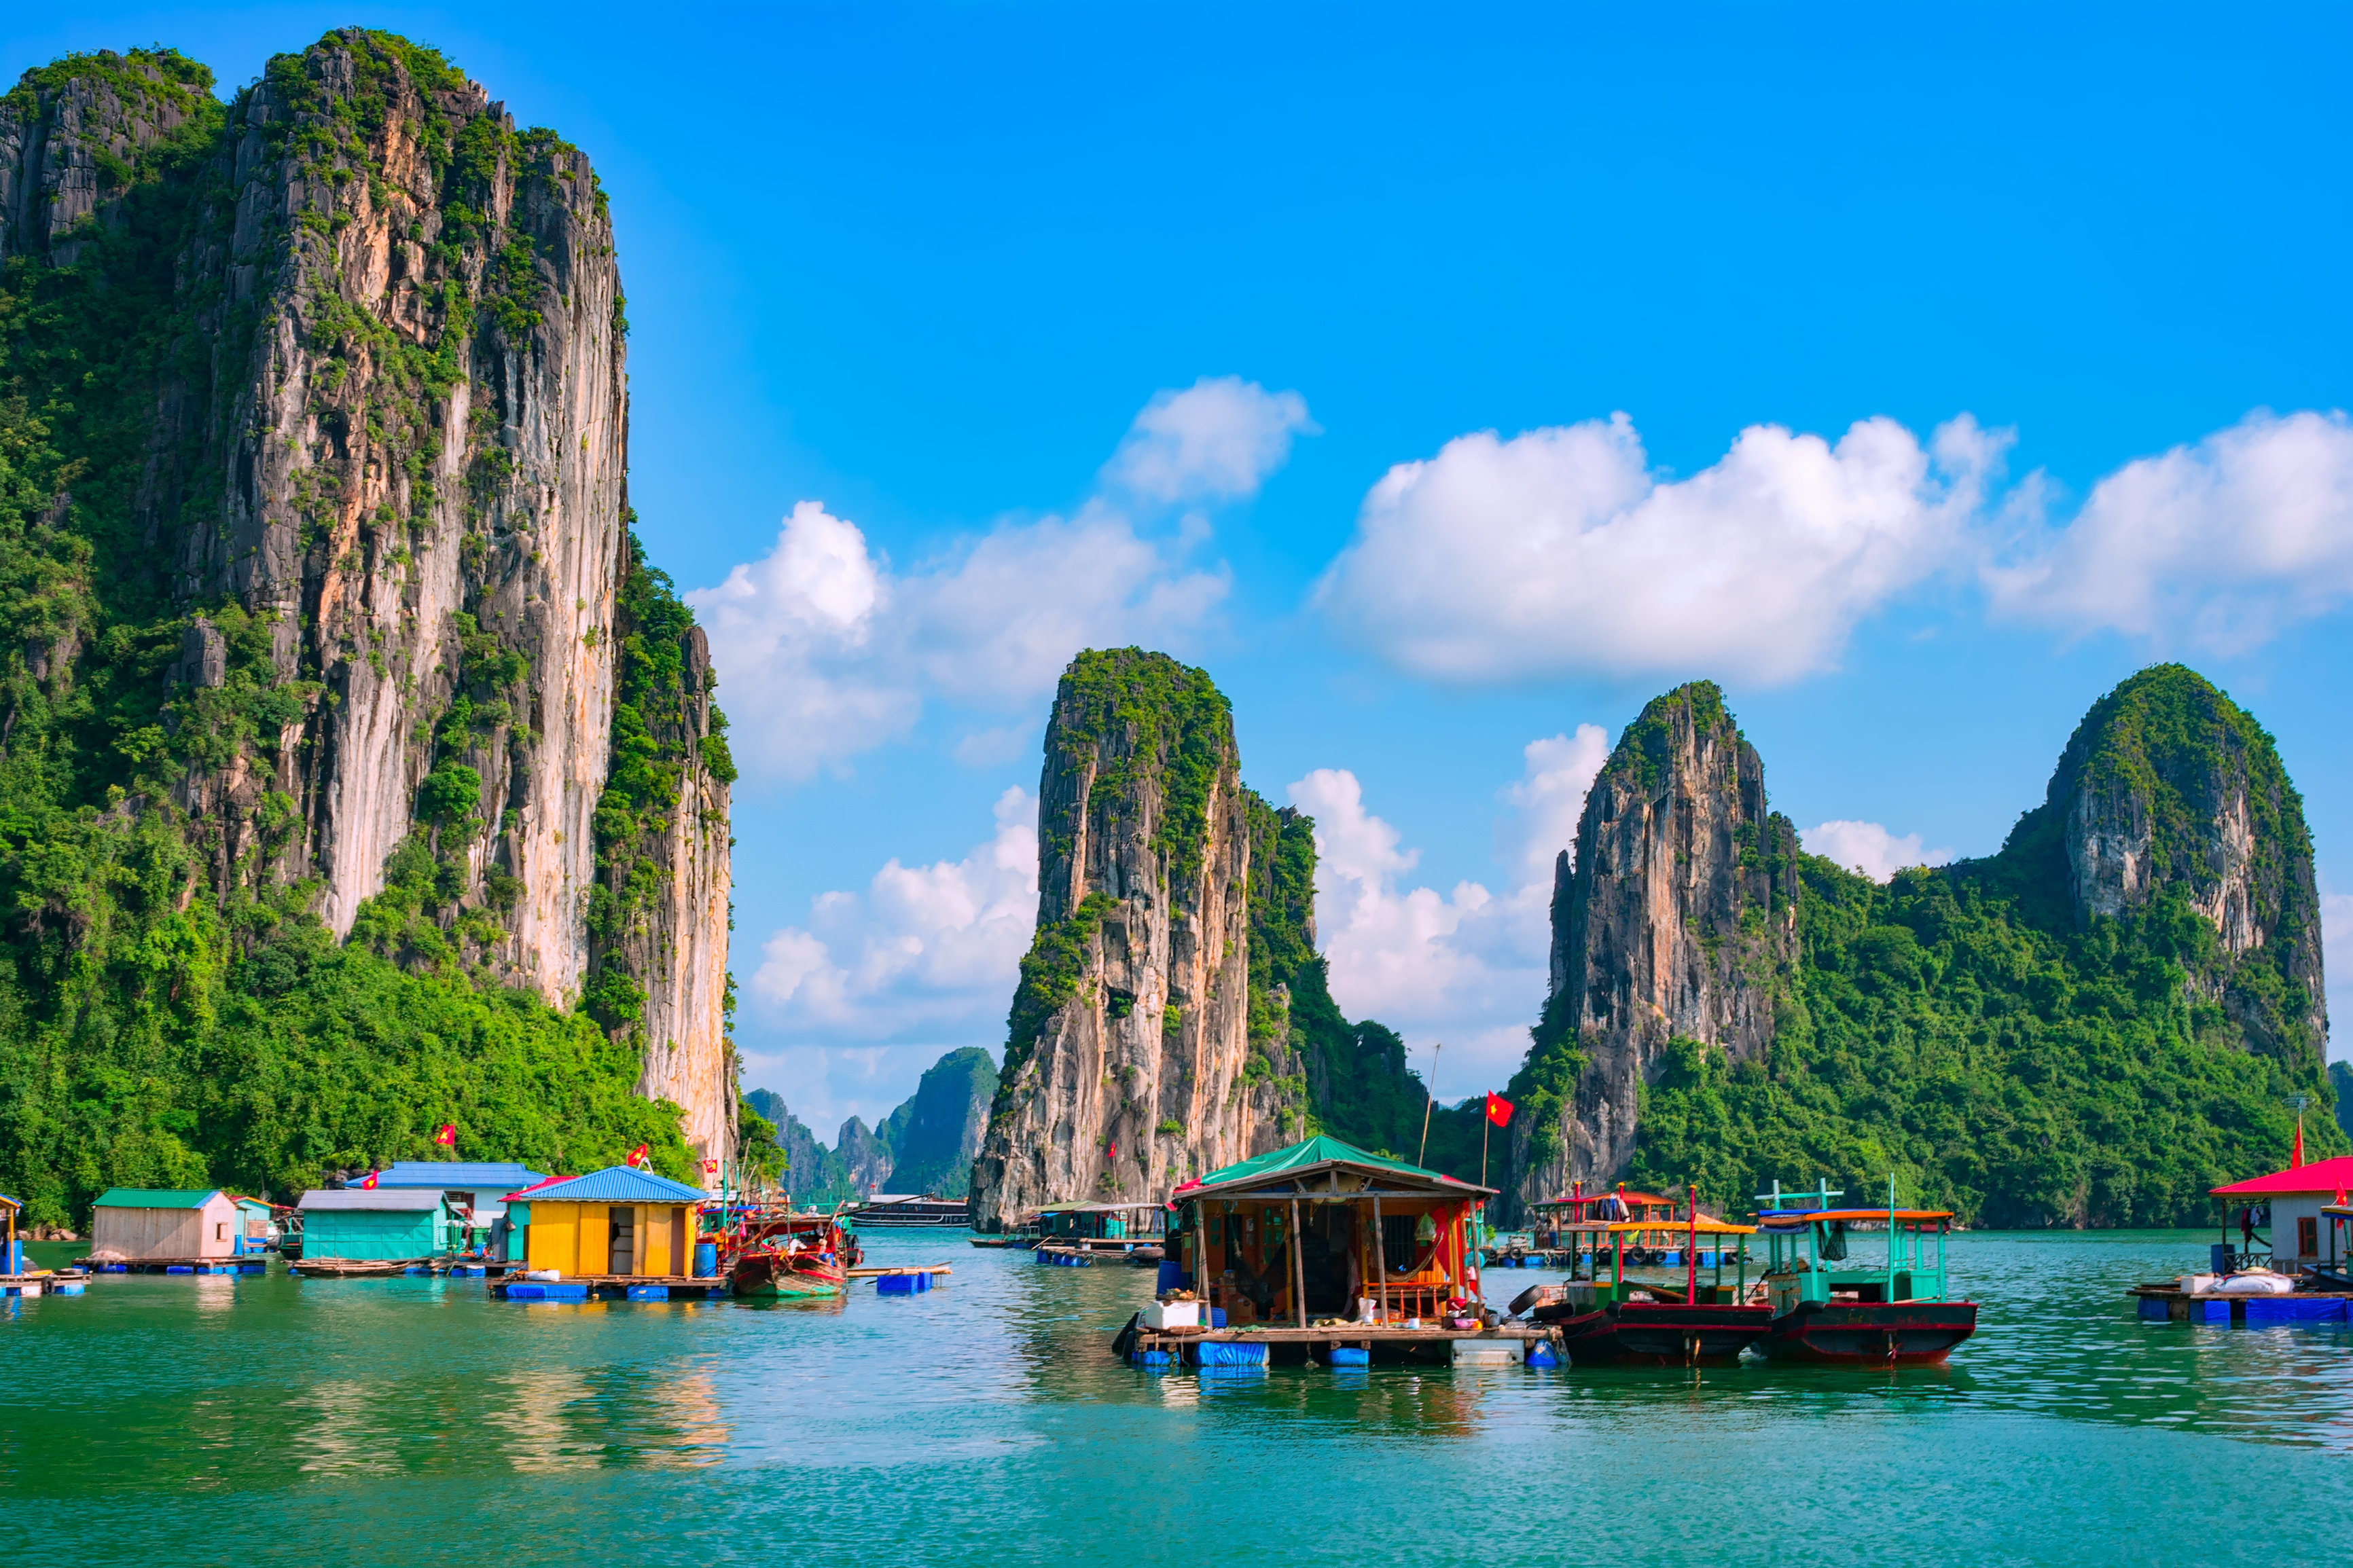 6-night Vietnam vacation with air, tours, breakfast & transfers from $1,312